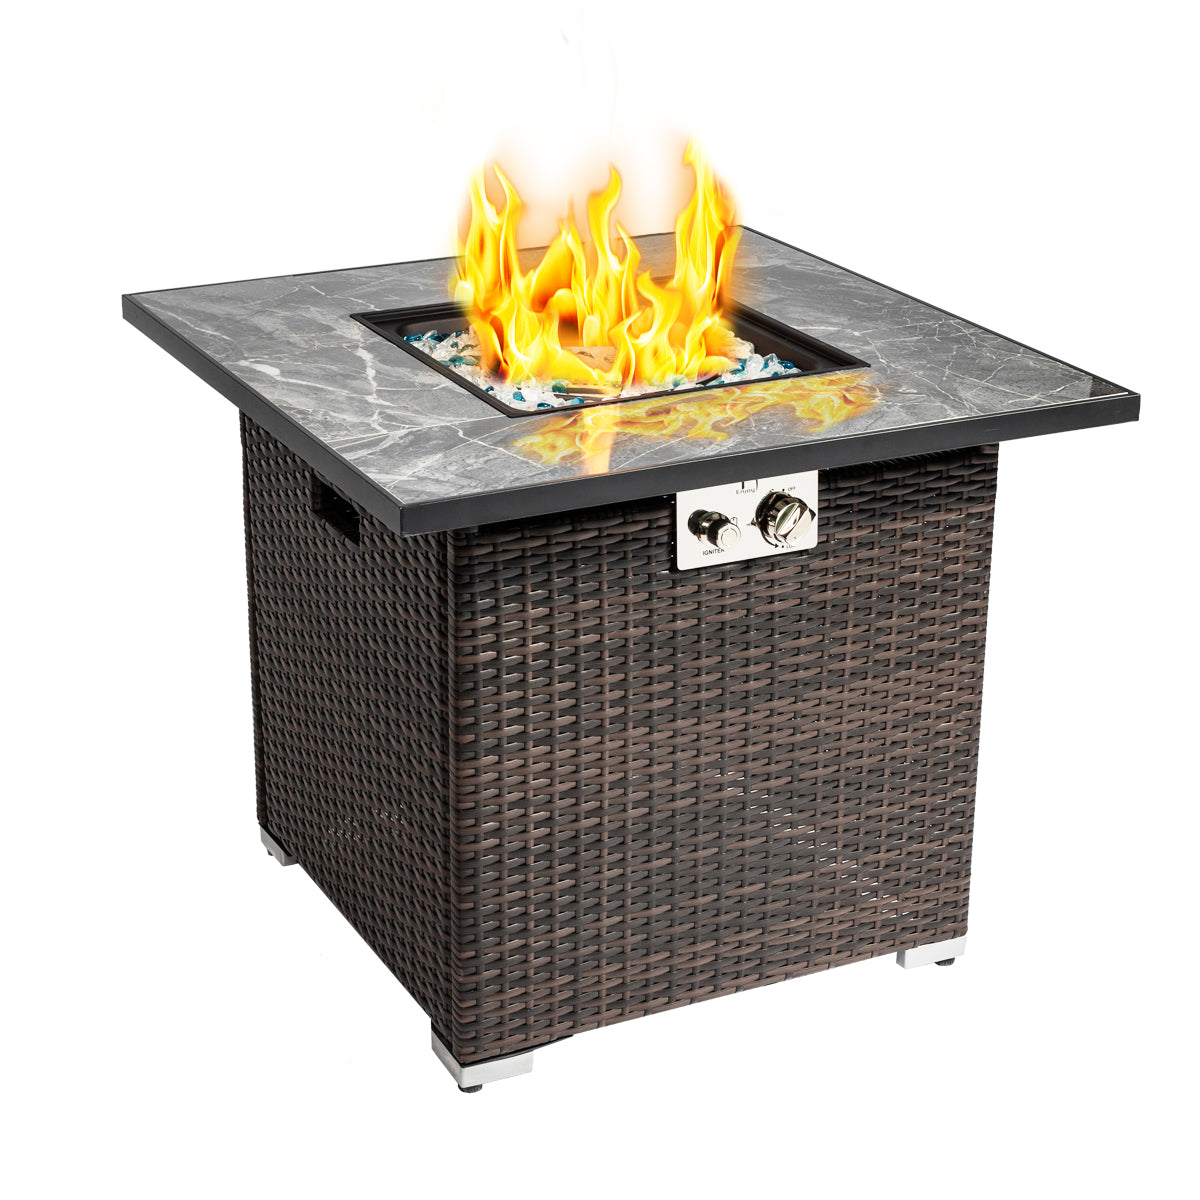 30in All-Weather Outdoor Wicker Fire Table with 50000 BTU and Ceramic Tabletop - Perfect for Backyard Gatherings with Hidden Tank Storage